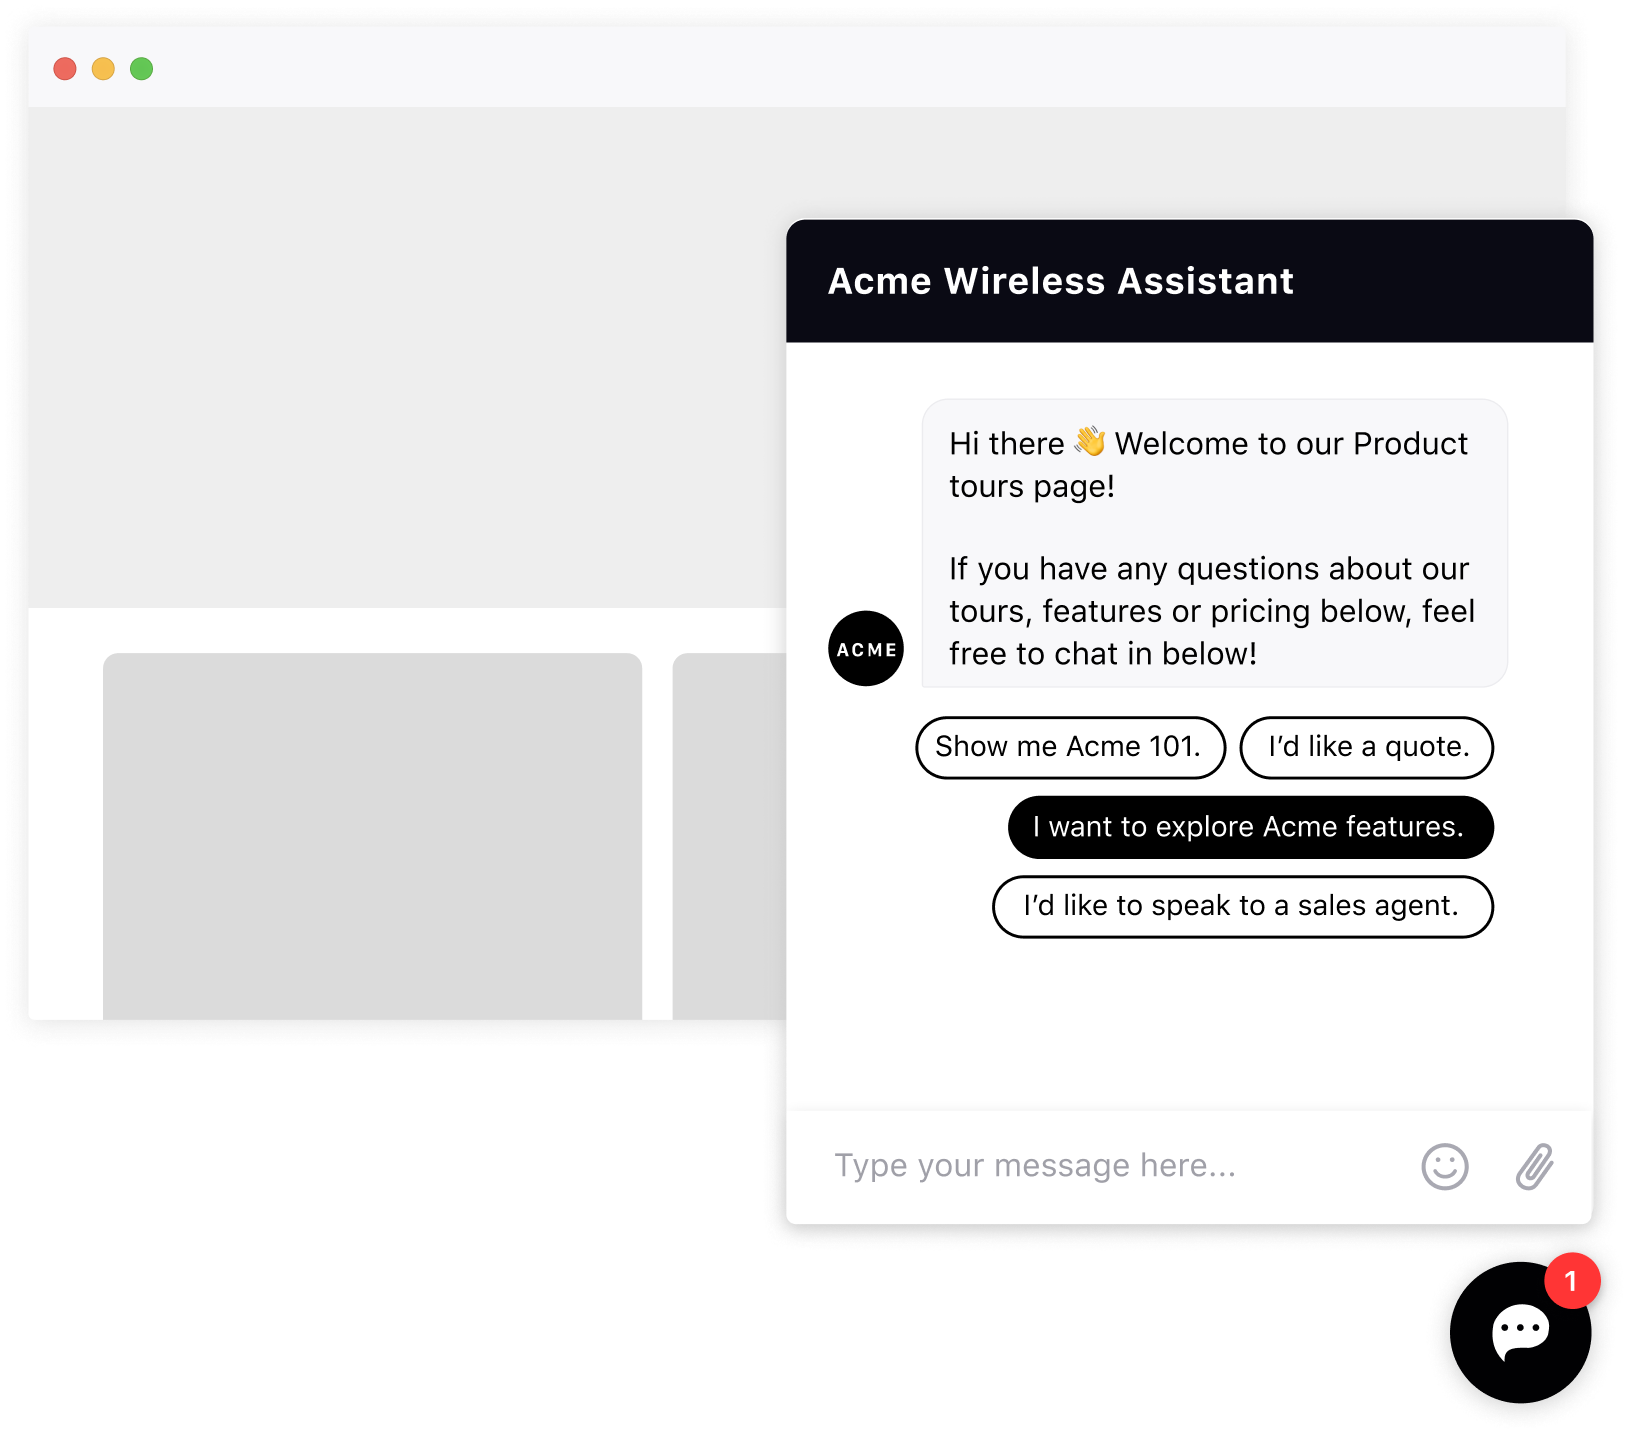 Live chat screenshot with Acme Wireless Assistant 